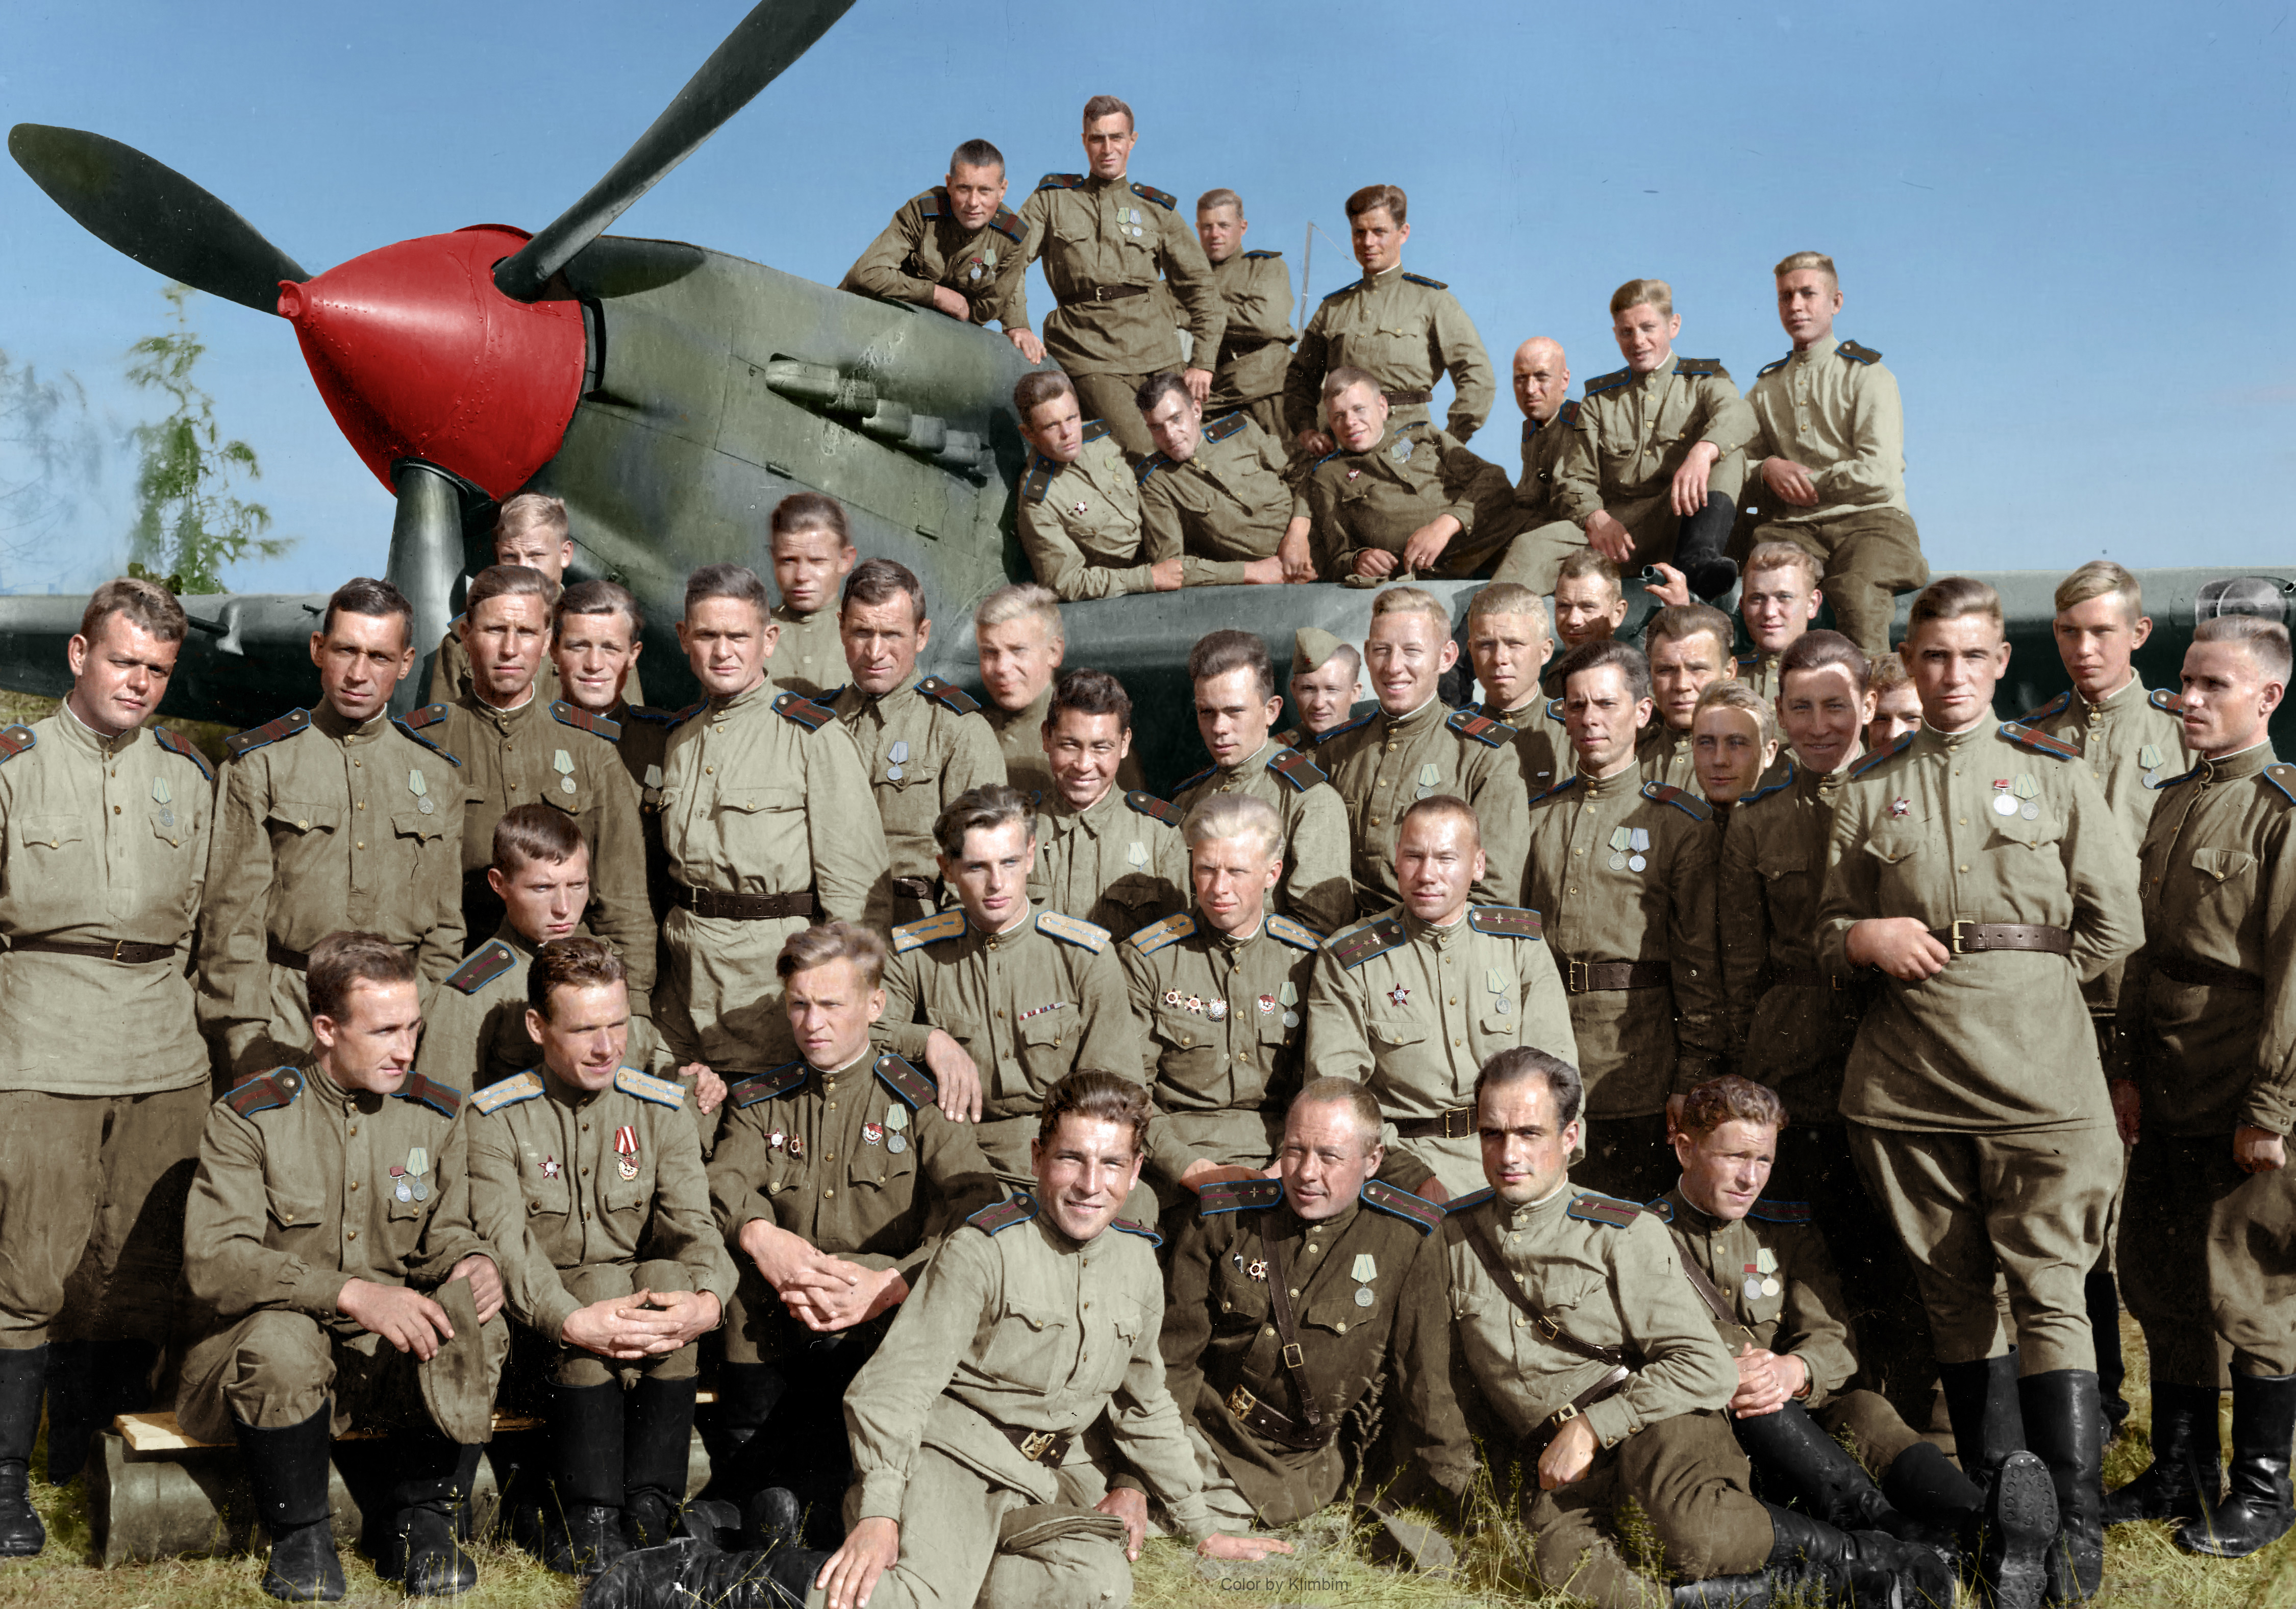 pilots-and-air-gunners-of-the-566th-assault-aviation-regiment-ww2-red-army-hero-of-the-soviet-union.jpg